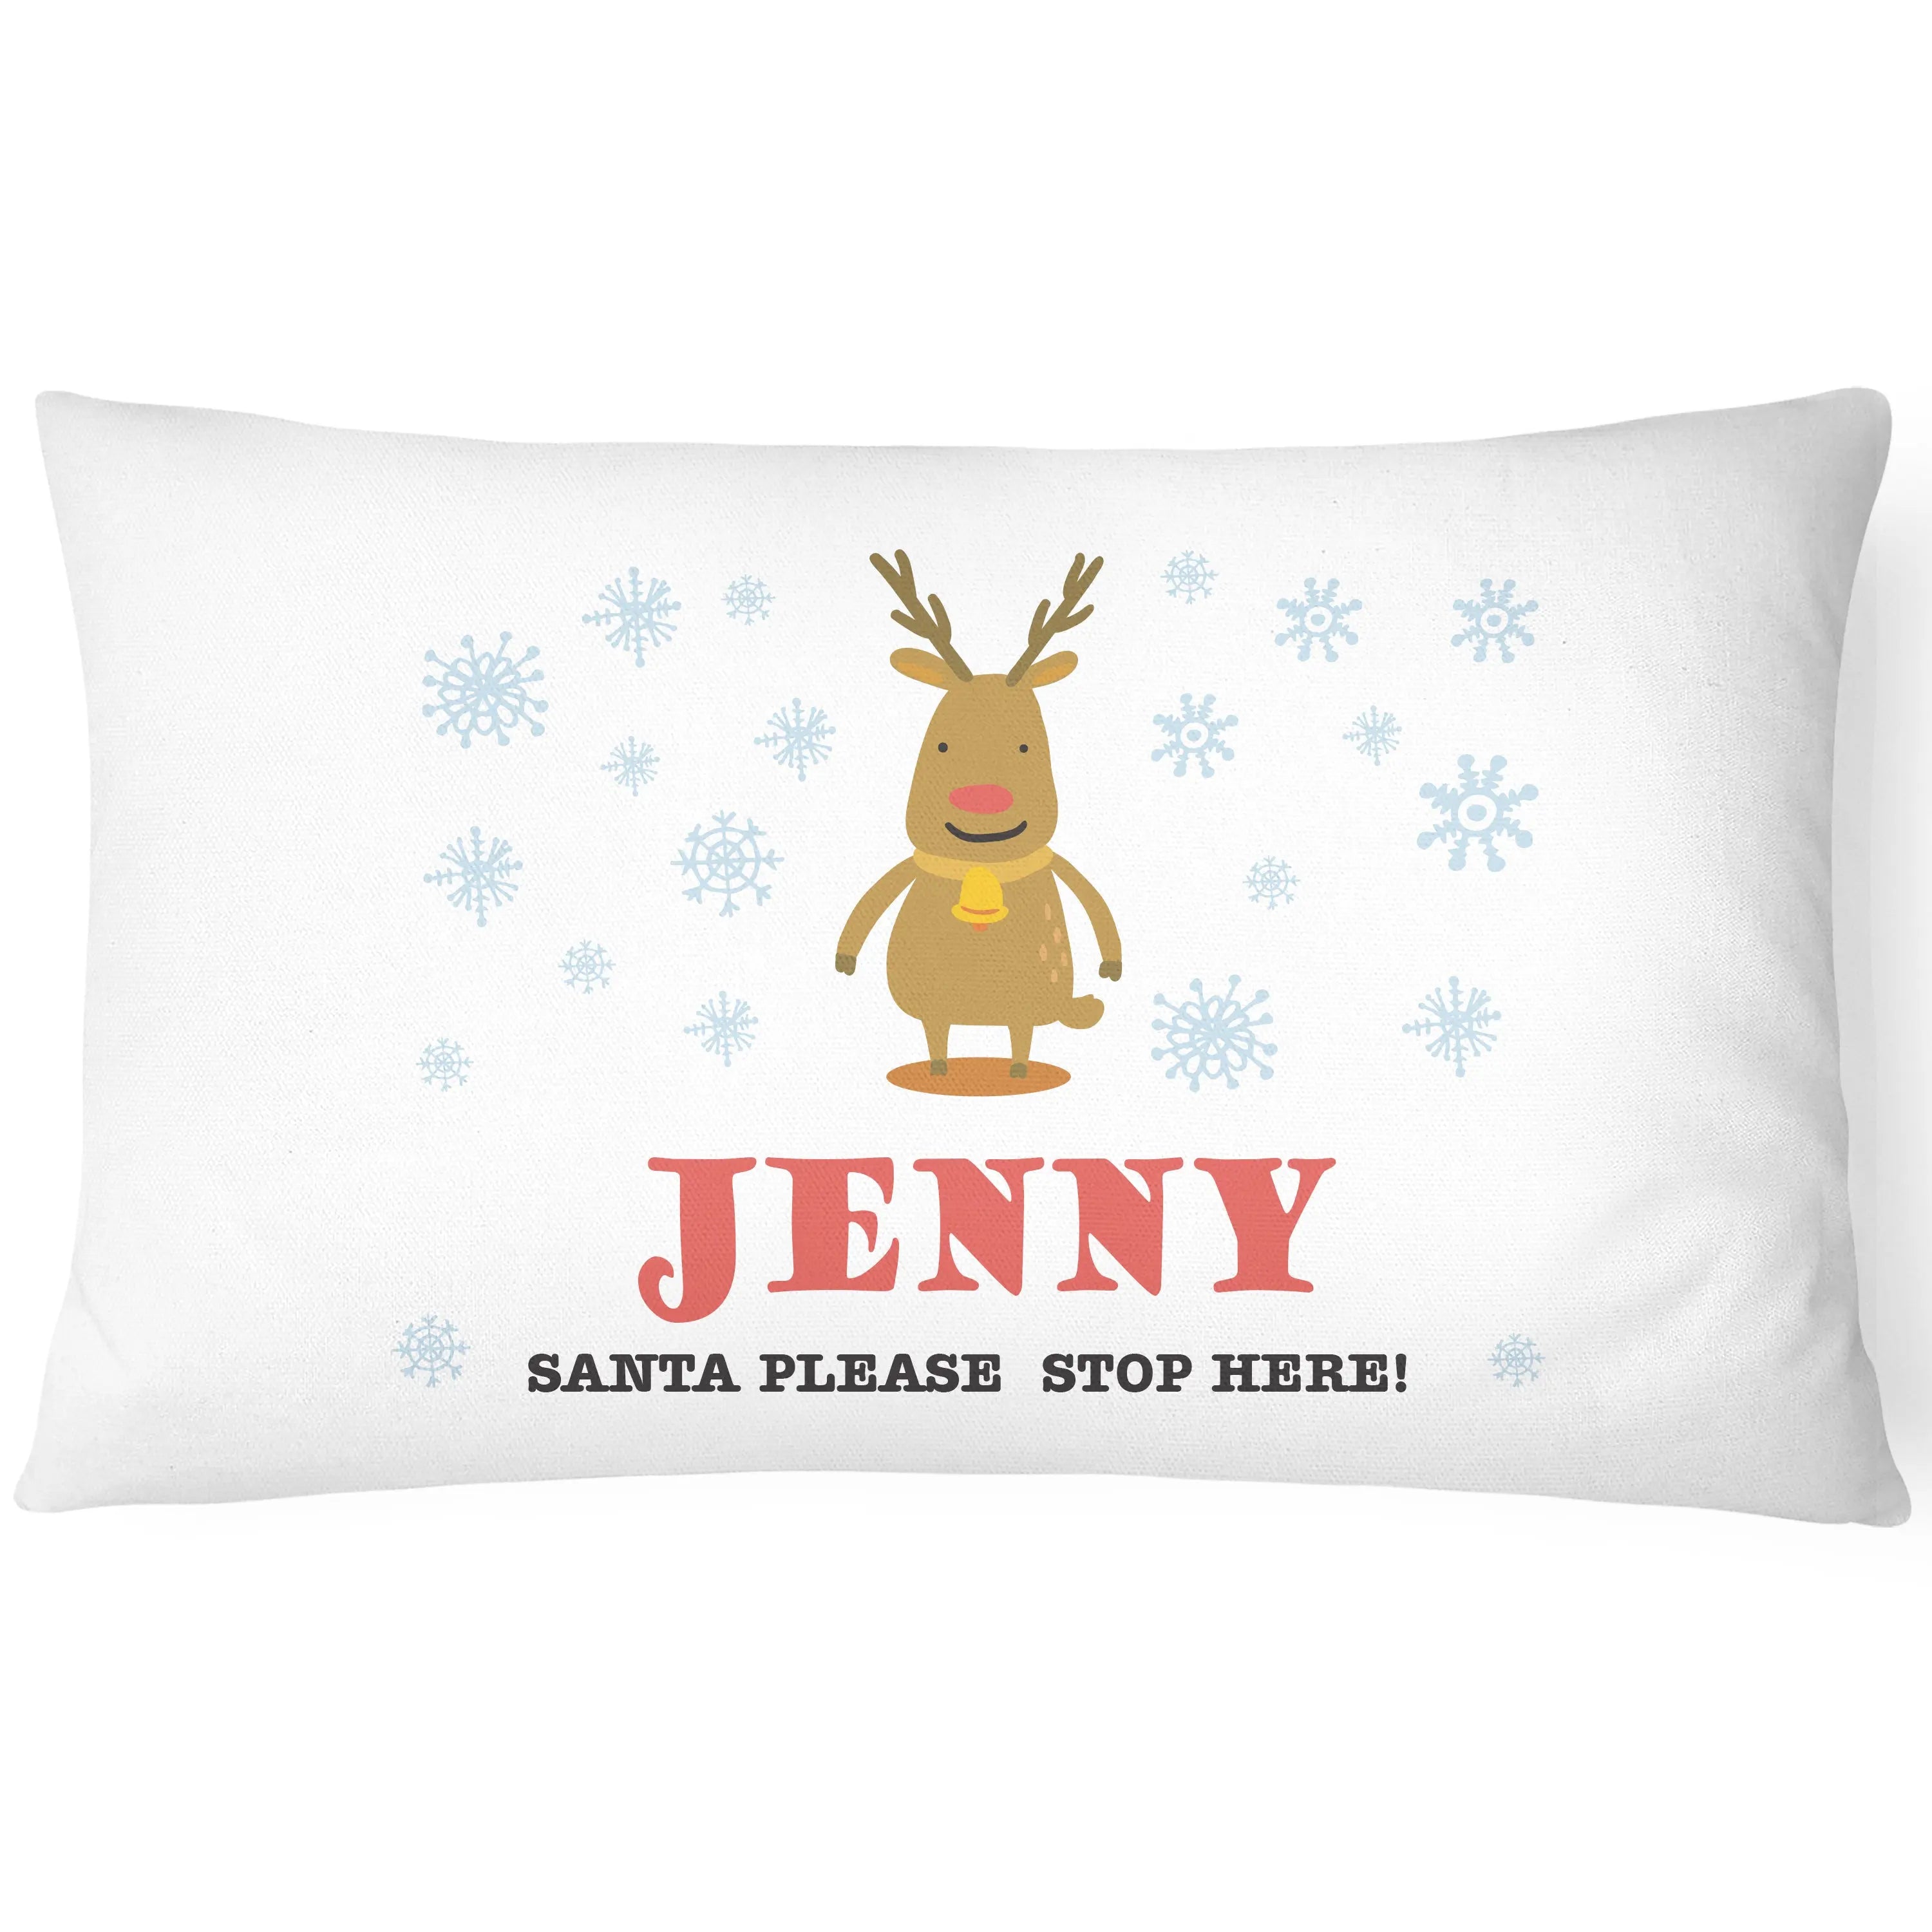 Christmas Pillowcase for Kids - Personalise With Any Name - Perfect Children's Gift - Reindeer - CushionPop